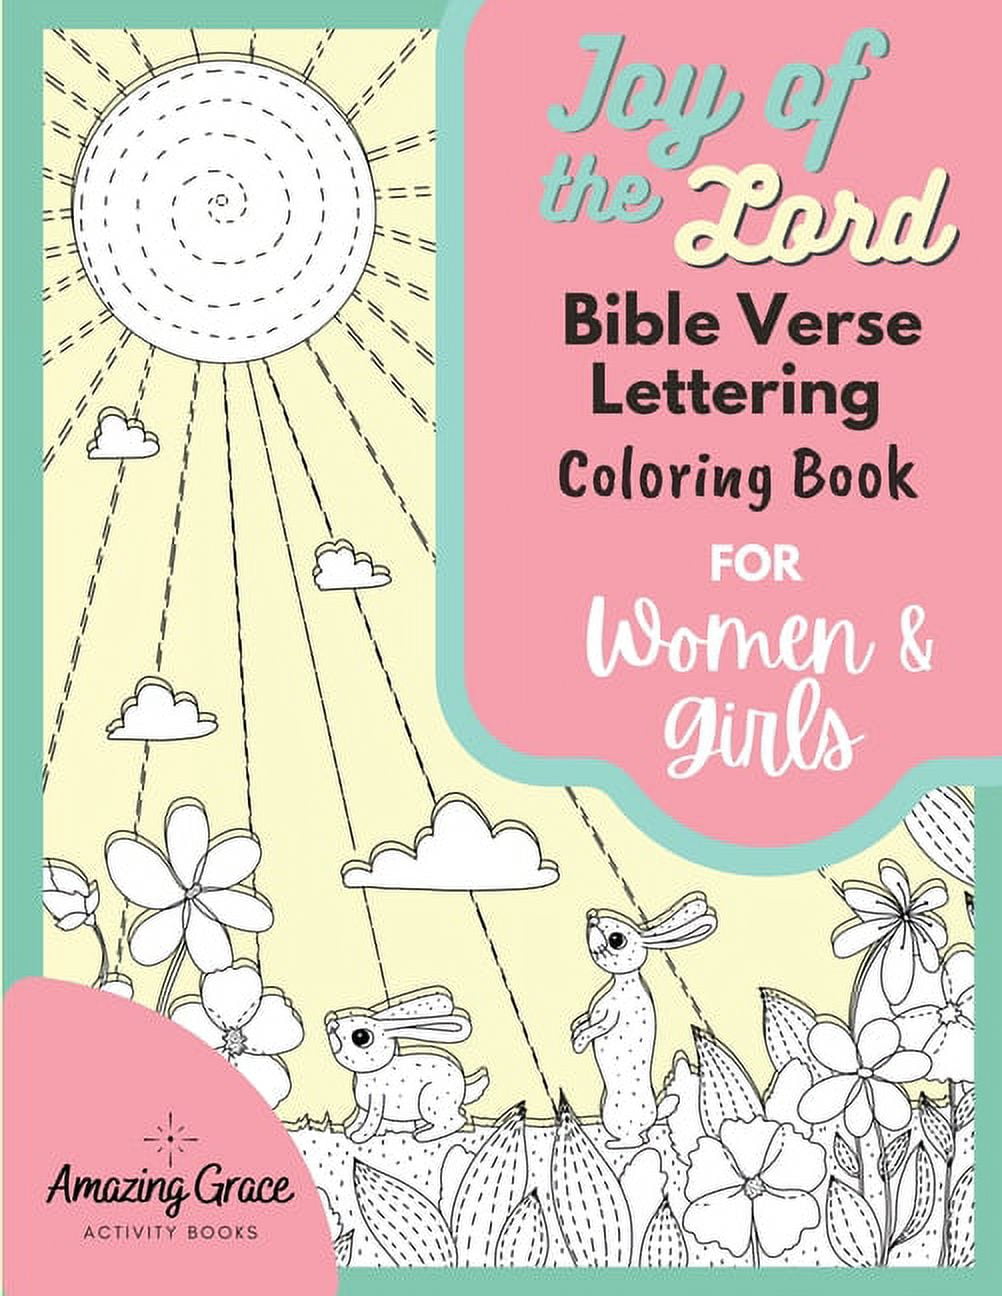 Joy of the Lord Bible Verse Lettering Coloring Book for Women & Girls: 40 Unique Color Pages & Uplifting Scriptures for Adults & Teens [Book]